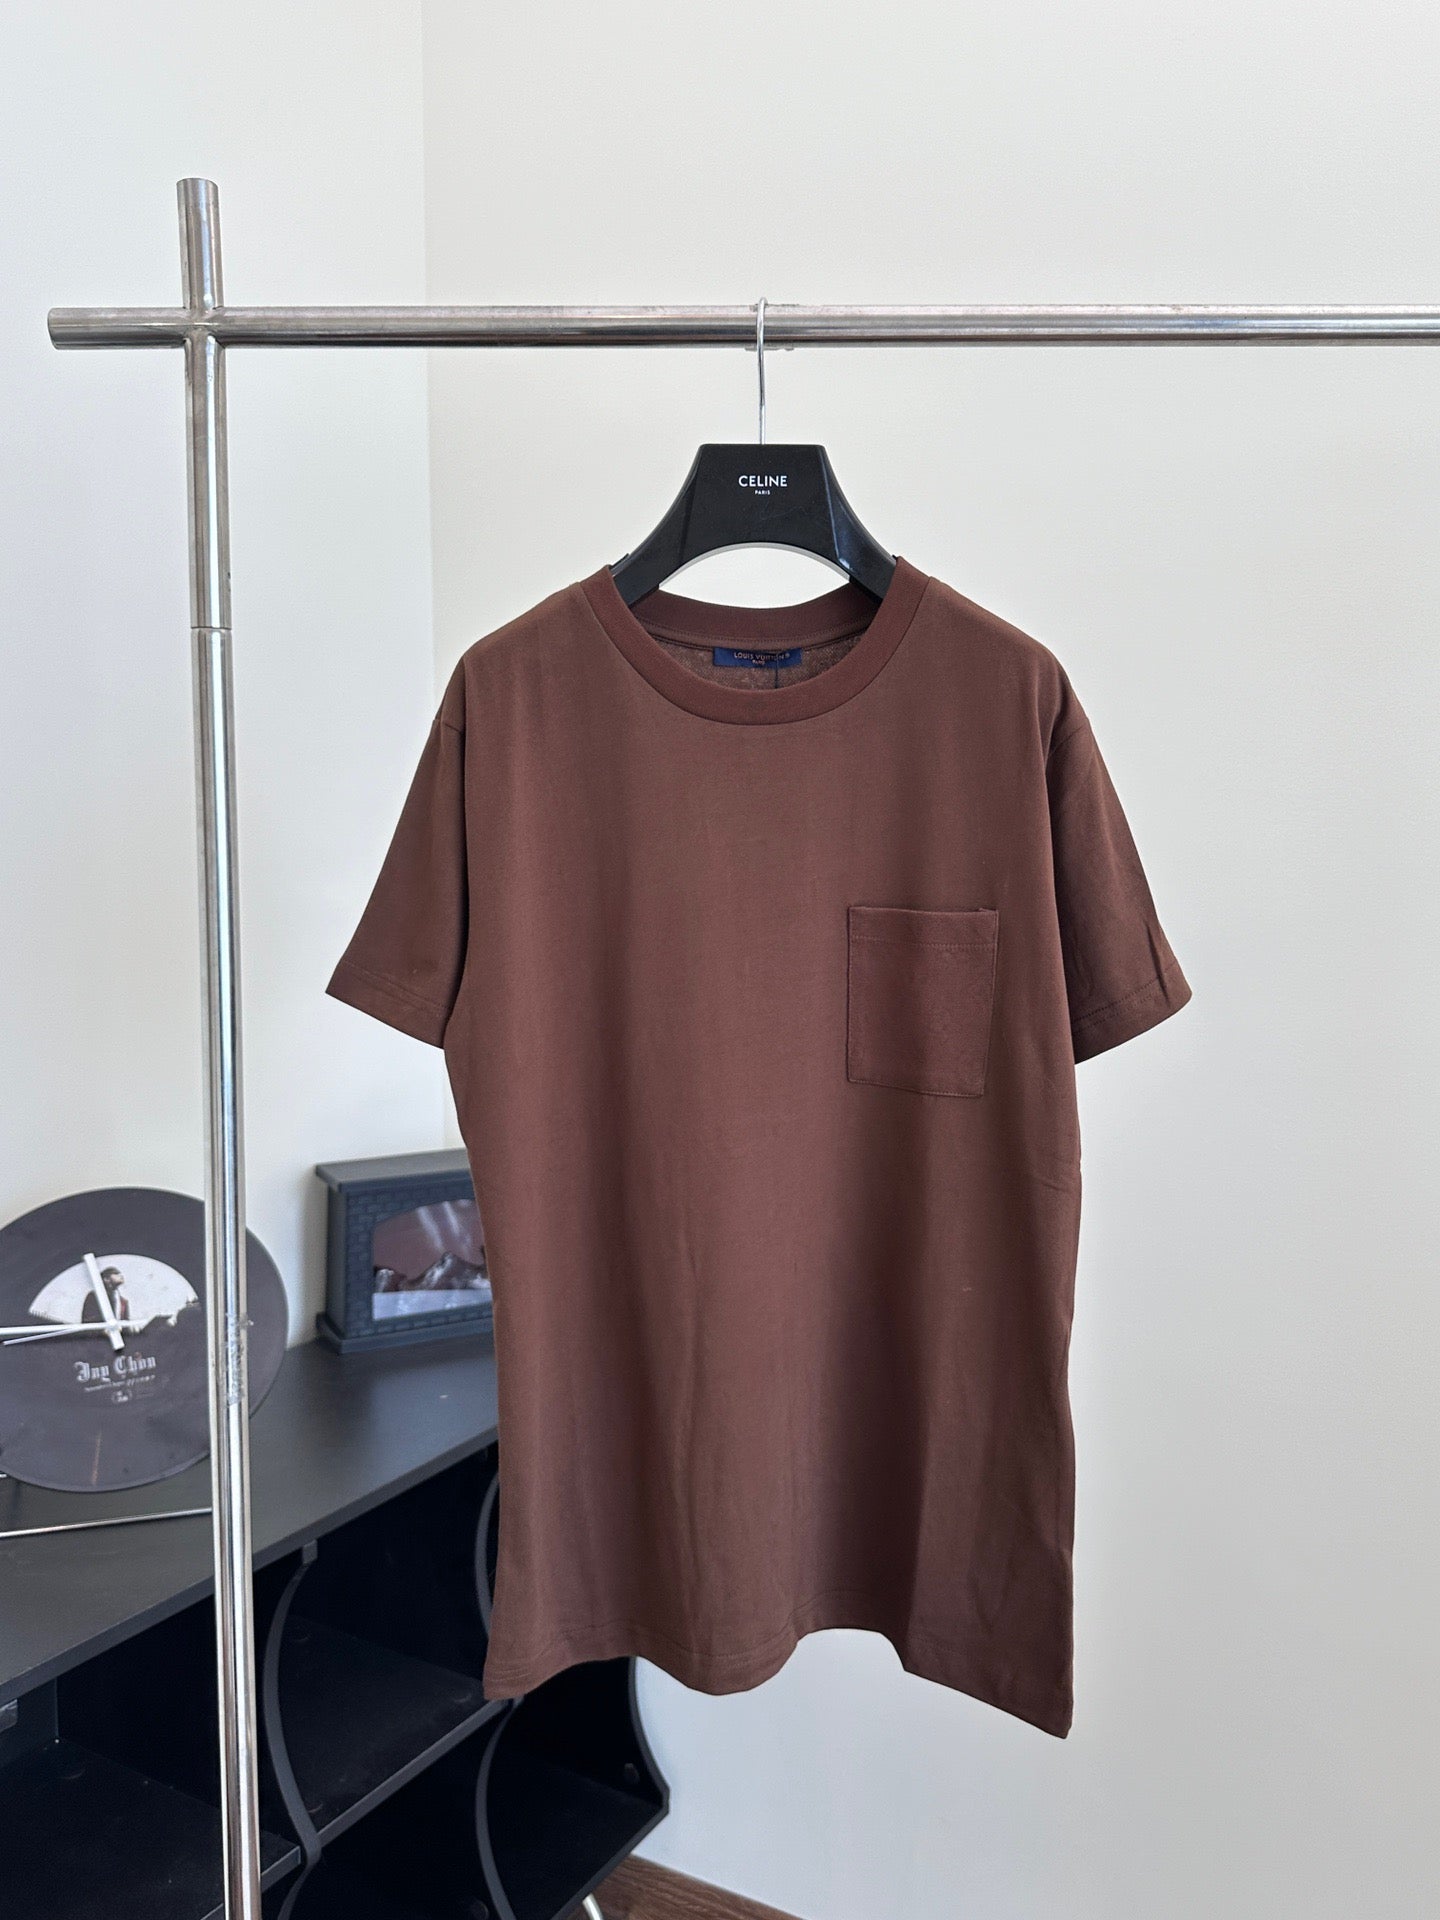 Black,White and Brown T-shirt